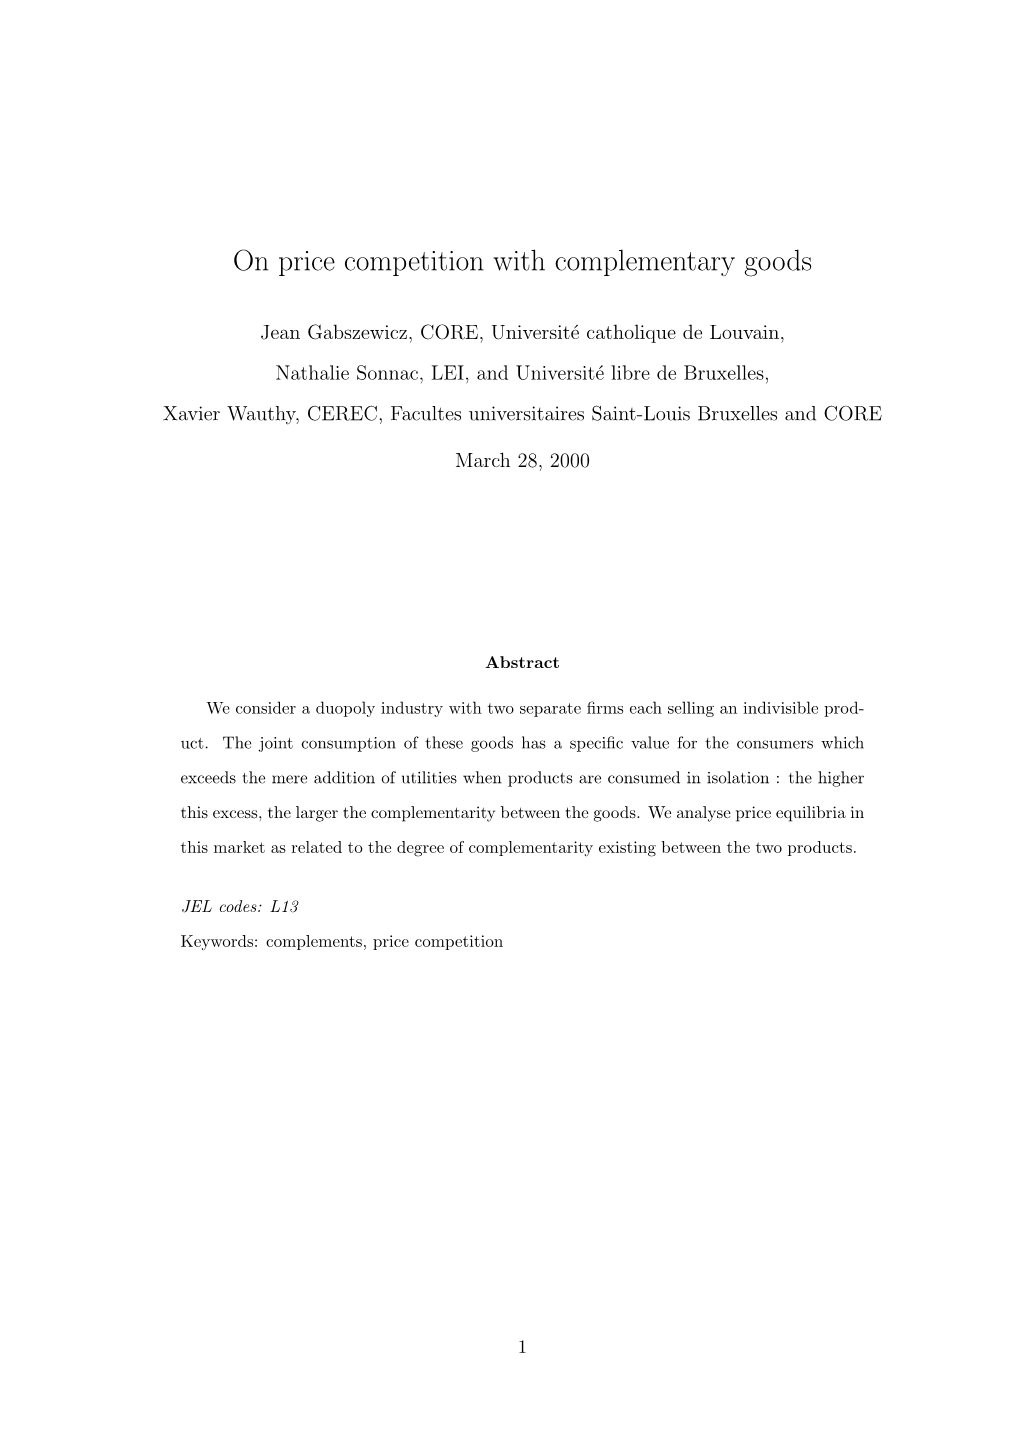 On Price Competition with Complementary Goods